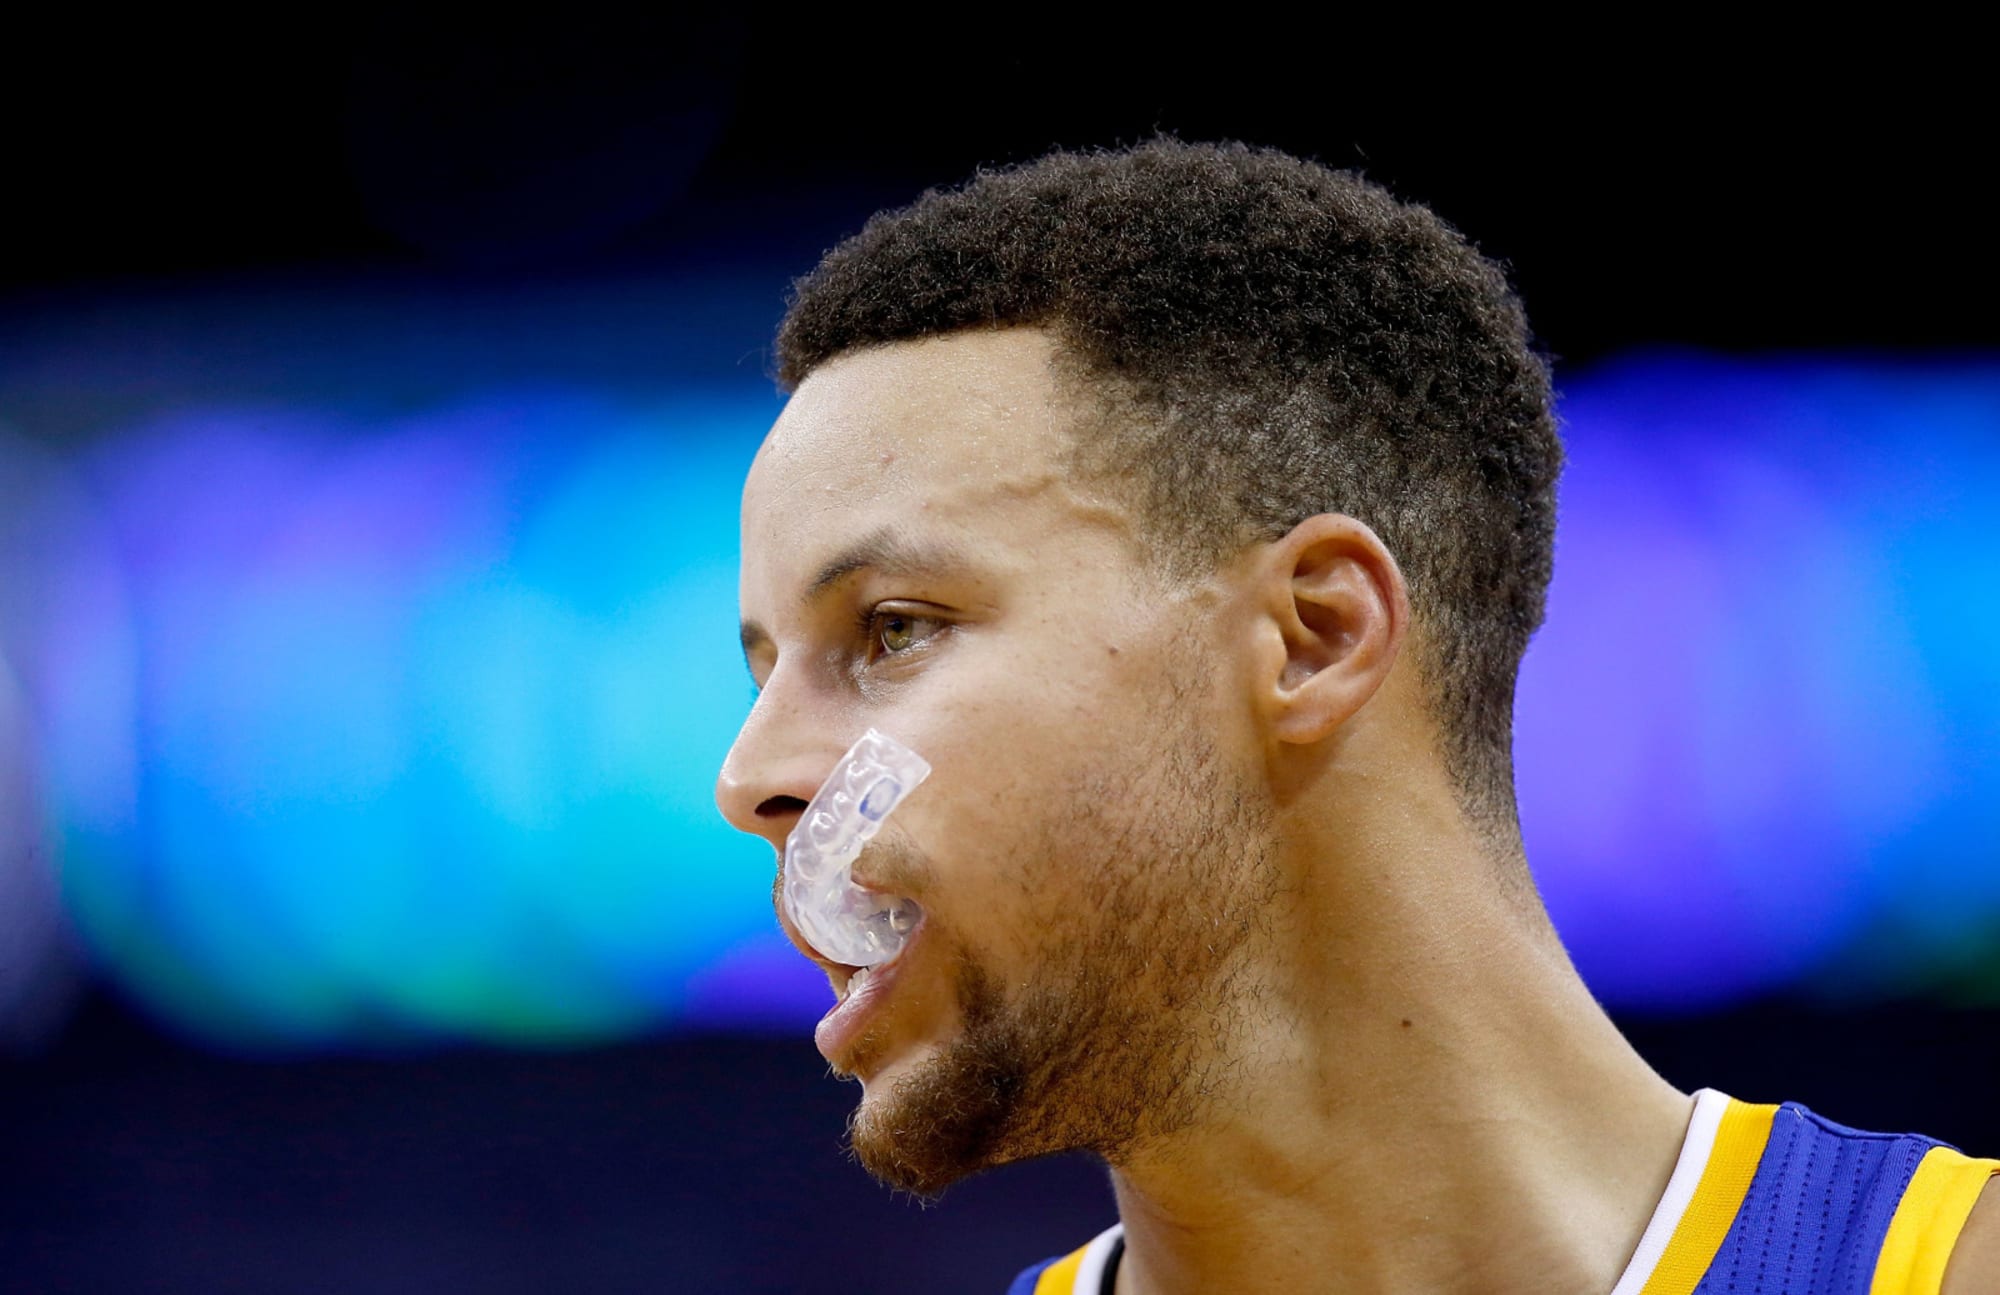 Stephen Curry S 2015 16 Season Is Amongst The Best Ever In Nba History